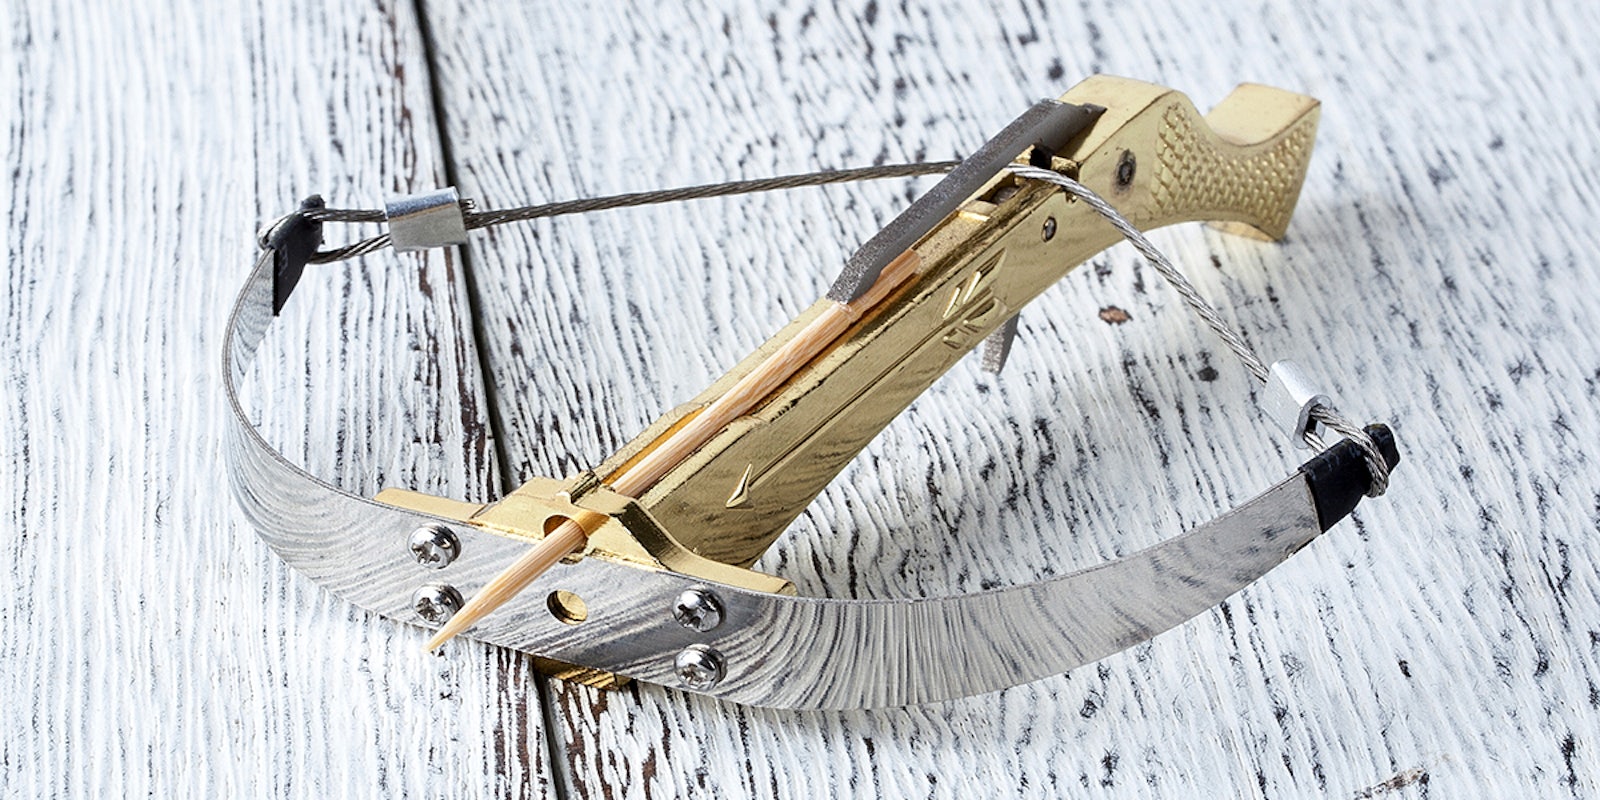 Refine your archery skills with rugged mini crossbows